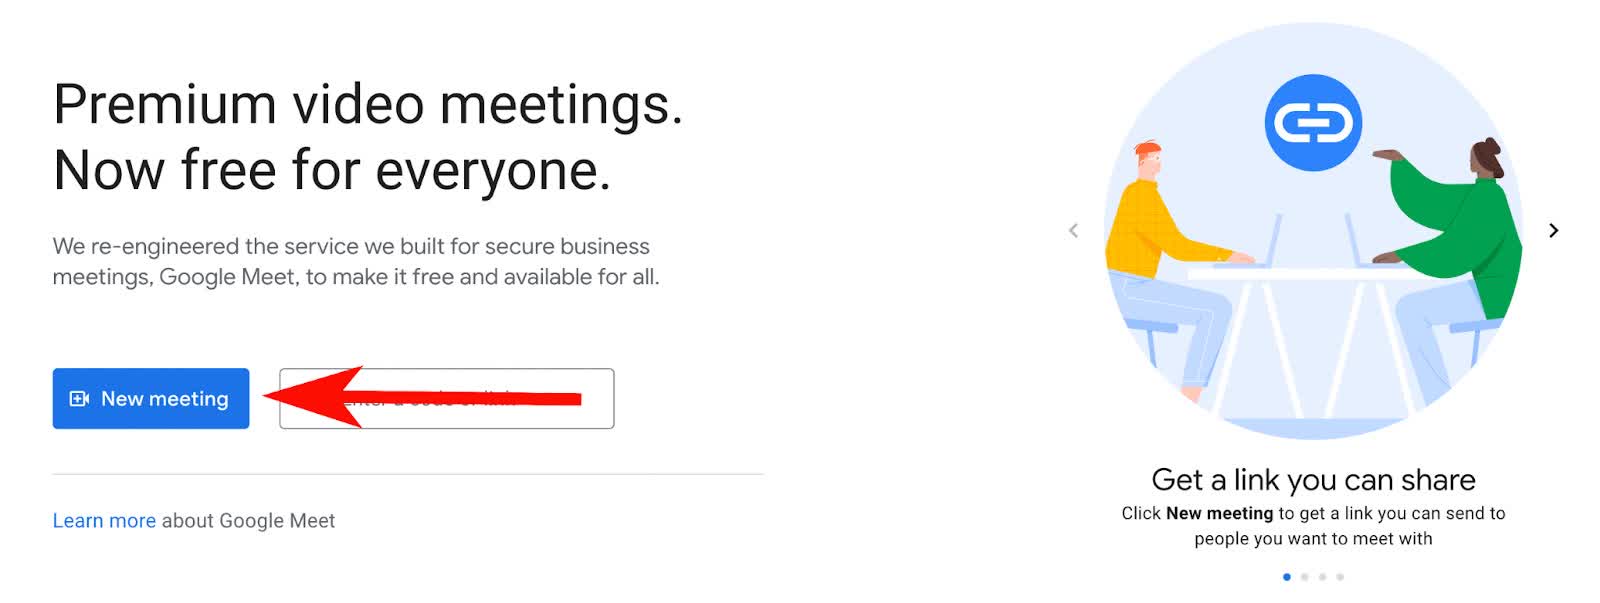 click the ‘New meeting’ button